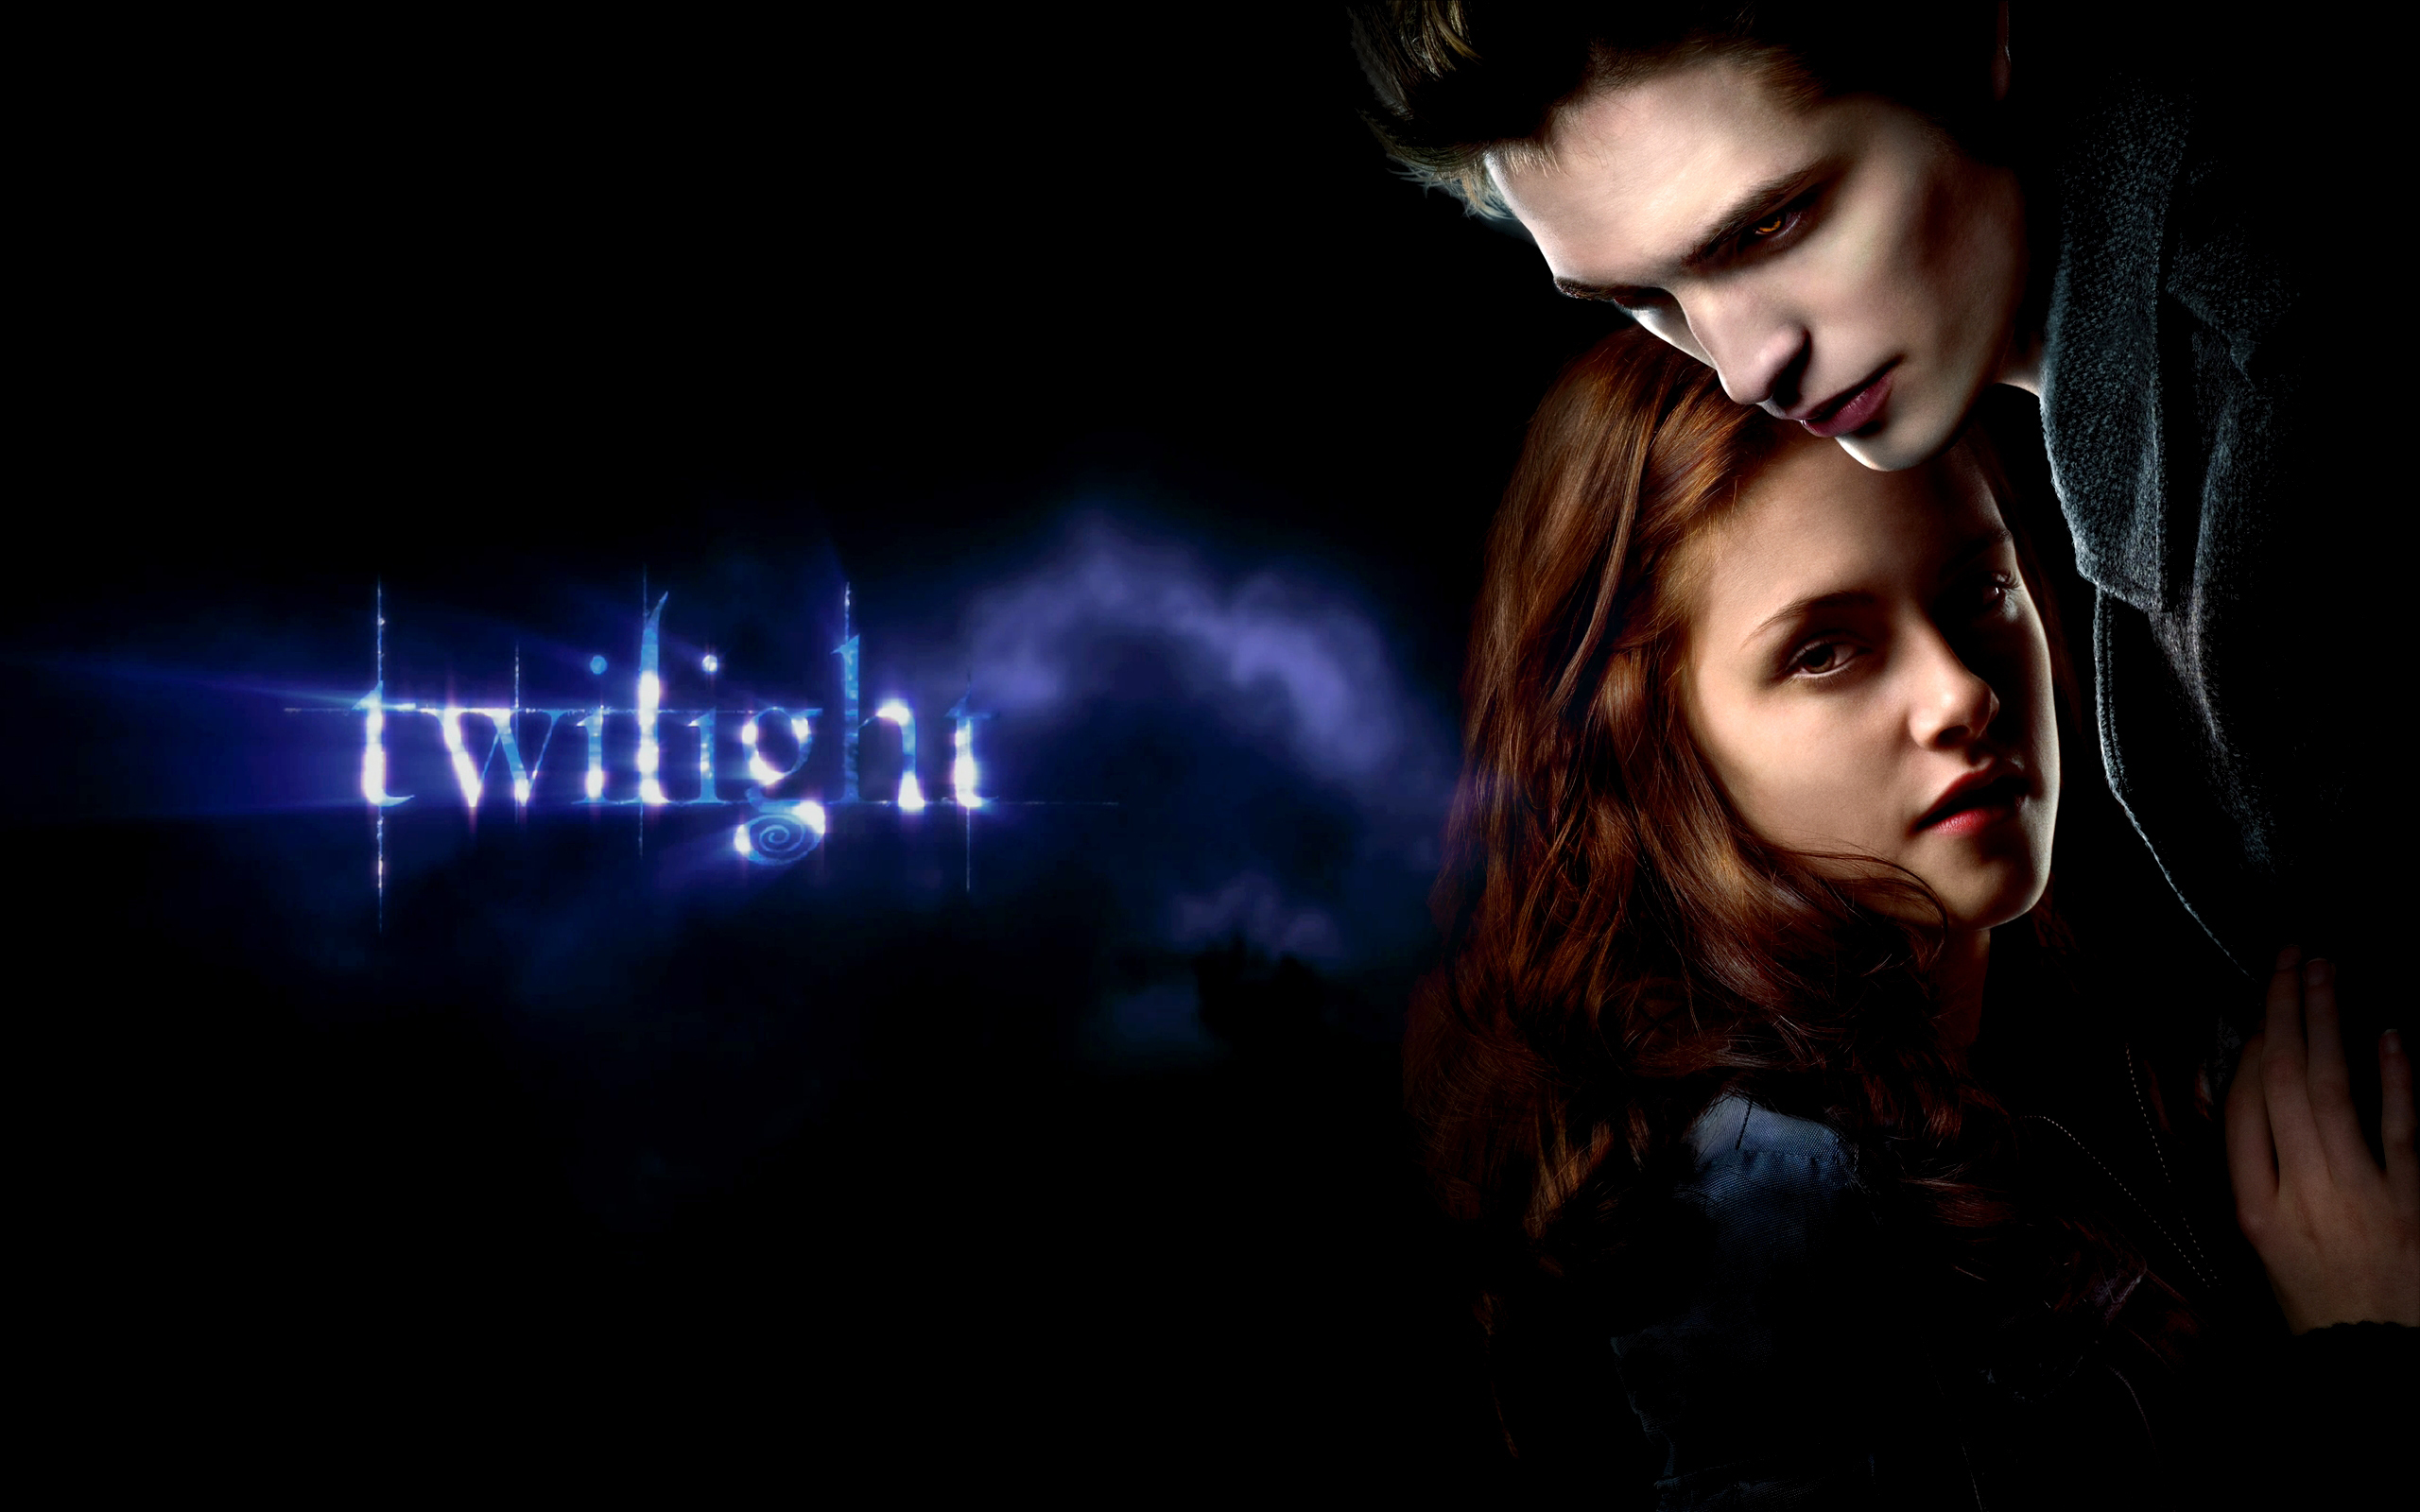 Twilight hd papers and backgrounds